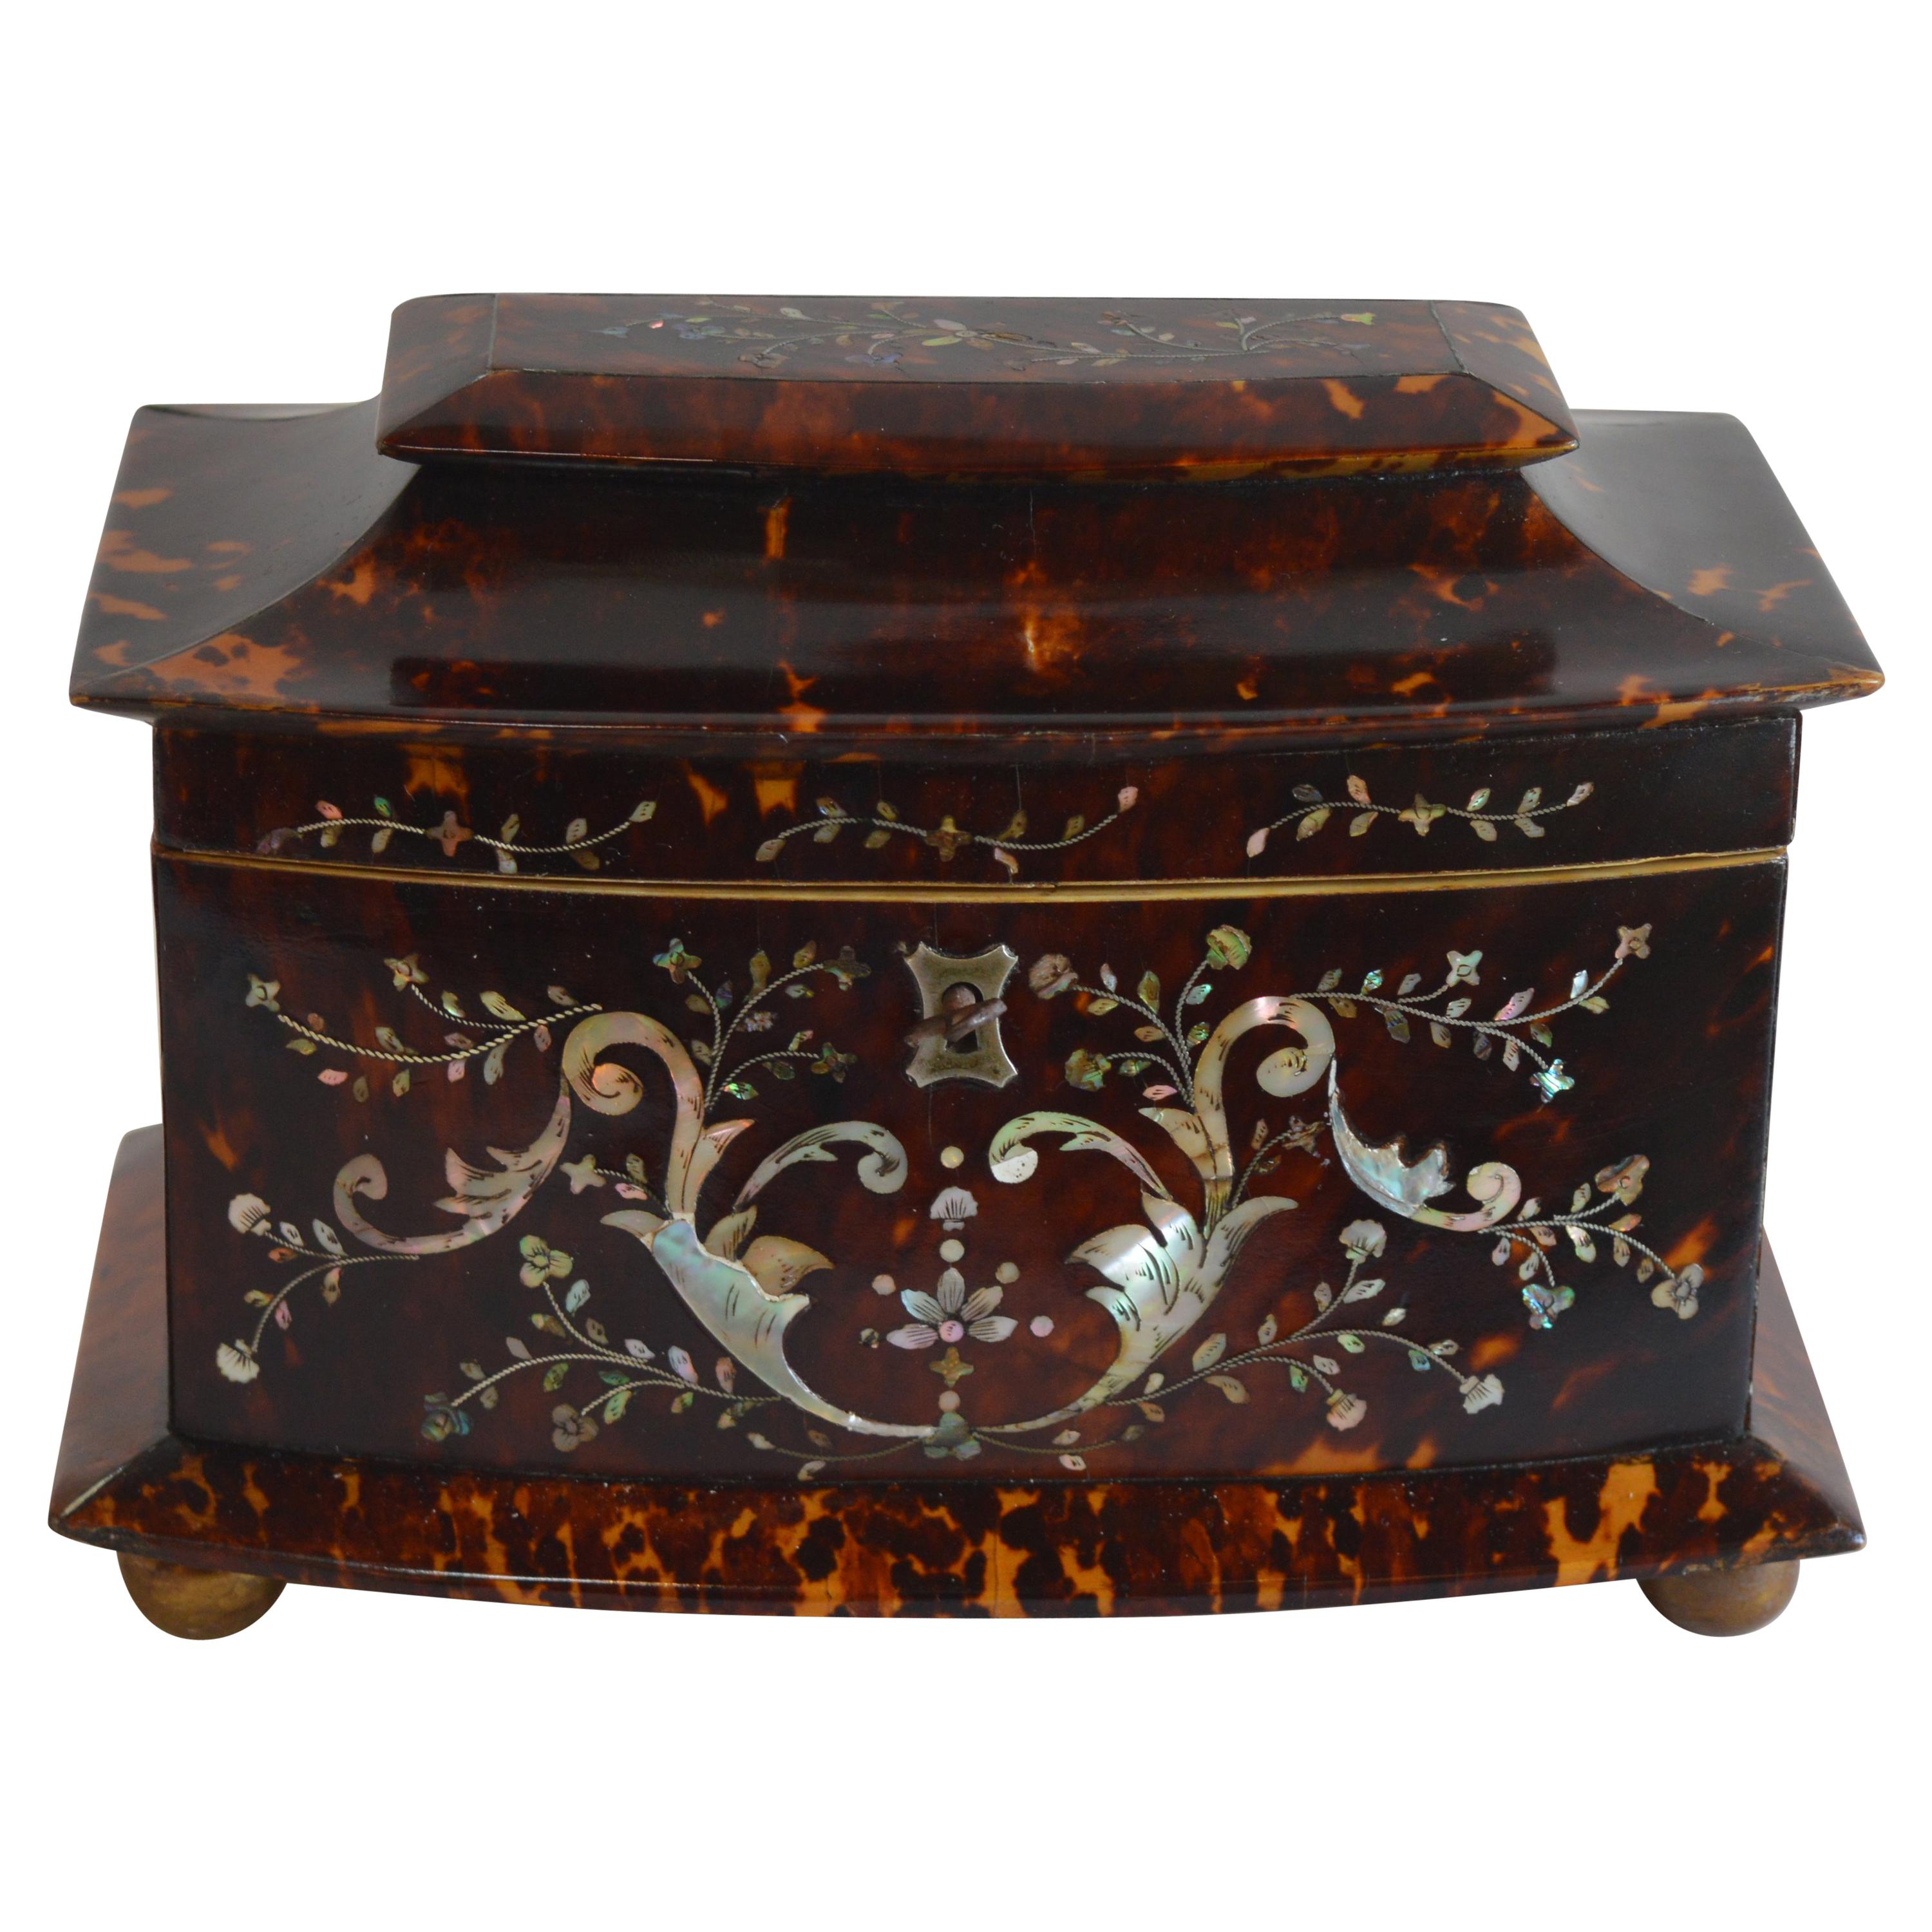 19th Century Tortoise Shell and Mother of Pearl Inlaid Tea Caddy